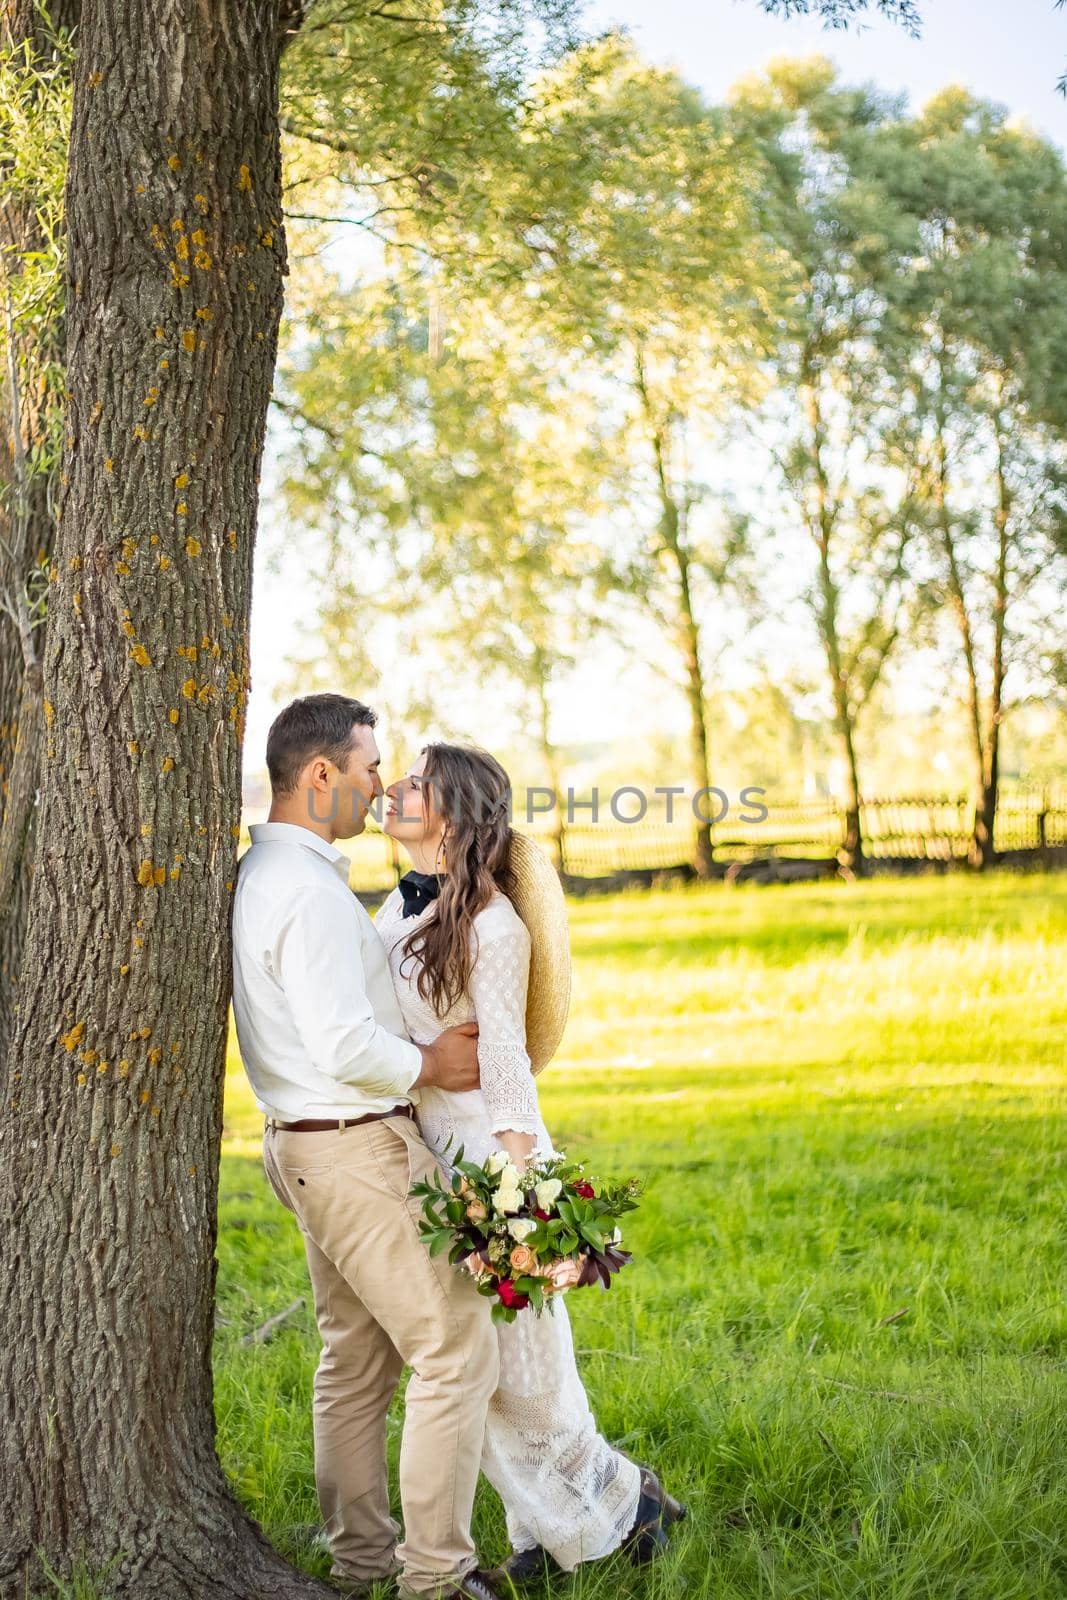 Happy young couple in green wheat field on their wedding day. Smiling newlyweds walking in the nature, holding hands. Family life, wedding concept